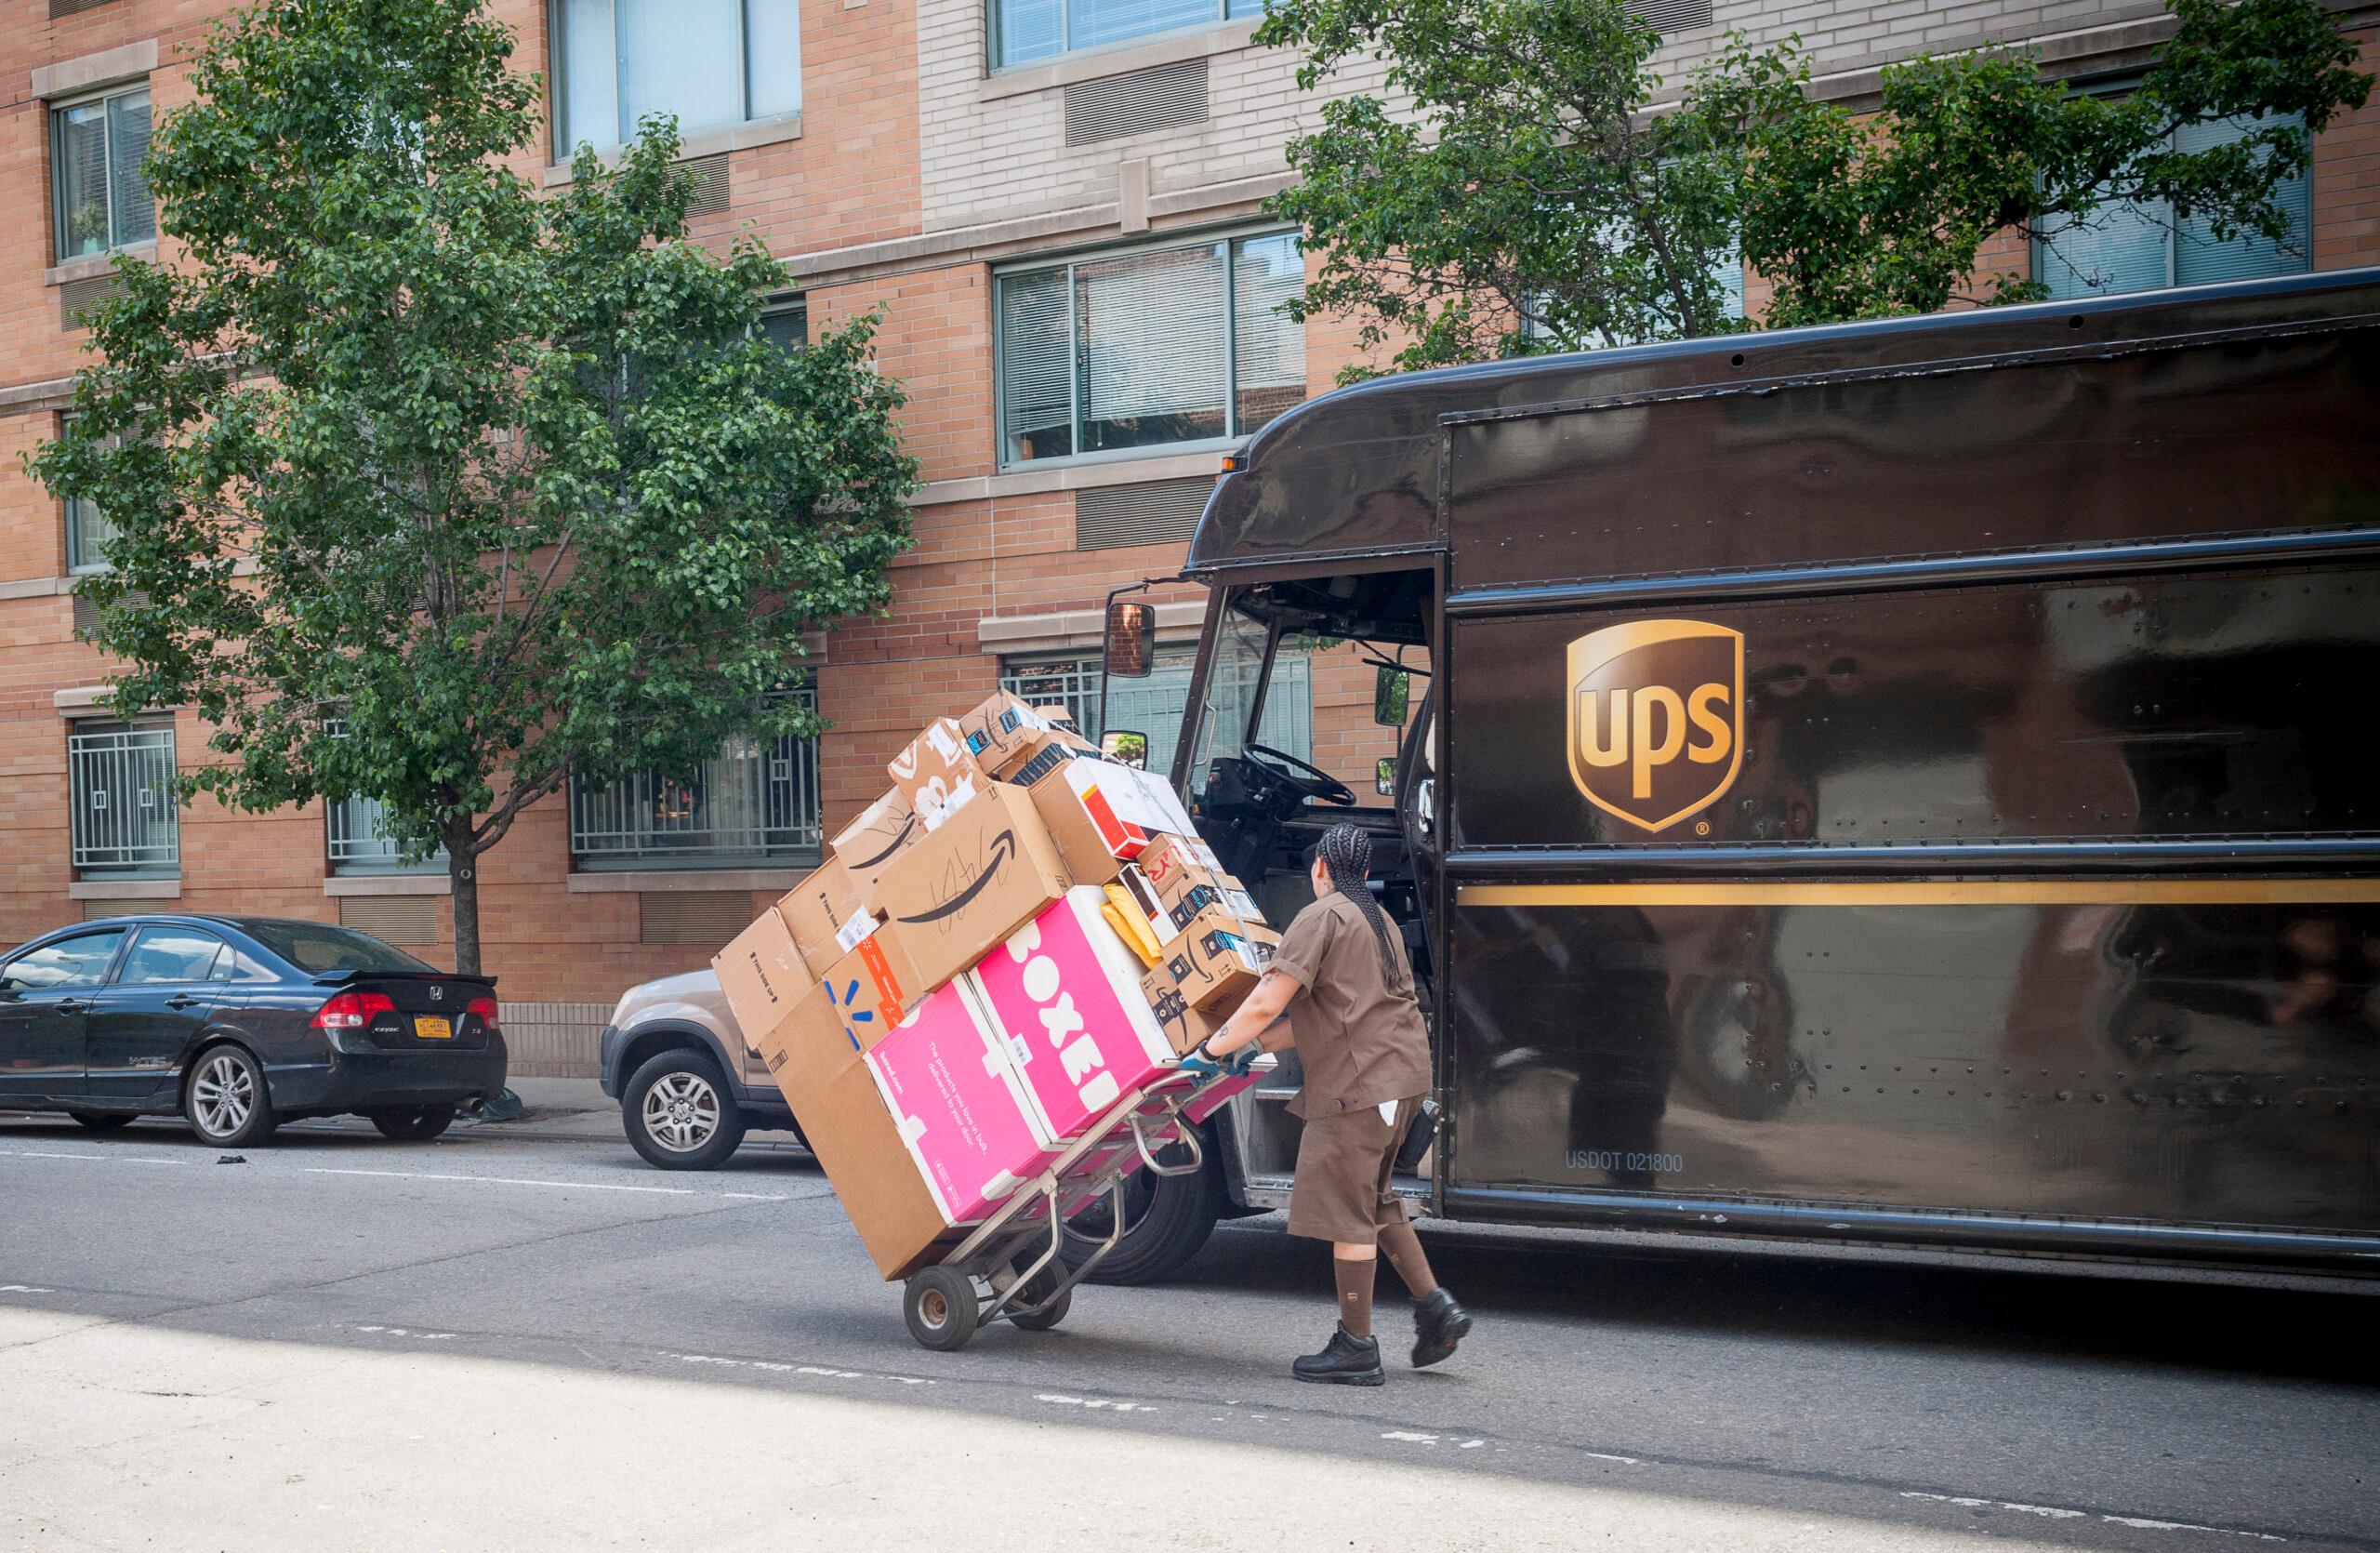 A UPS worker, her handcart laden with packages, goes on her appointed rounds in Greenwich Village in New York on Thursday, June 1, 2017. (© Richard B. Levine) Newscom/(Mega Agency TagID: lrphotos108655.jpg) [Photo via Mega Agency]